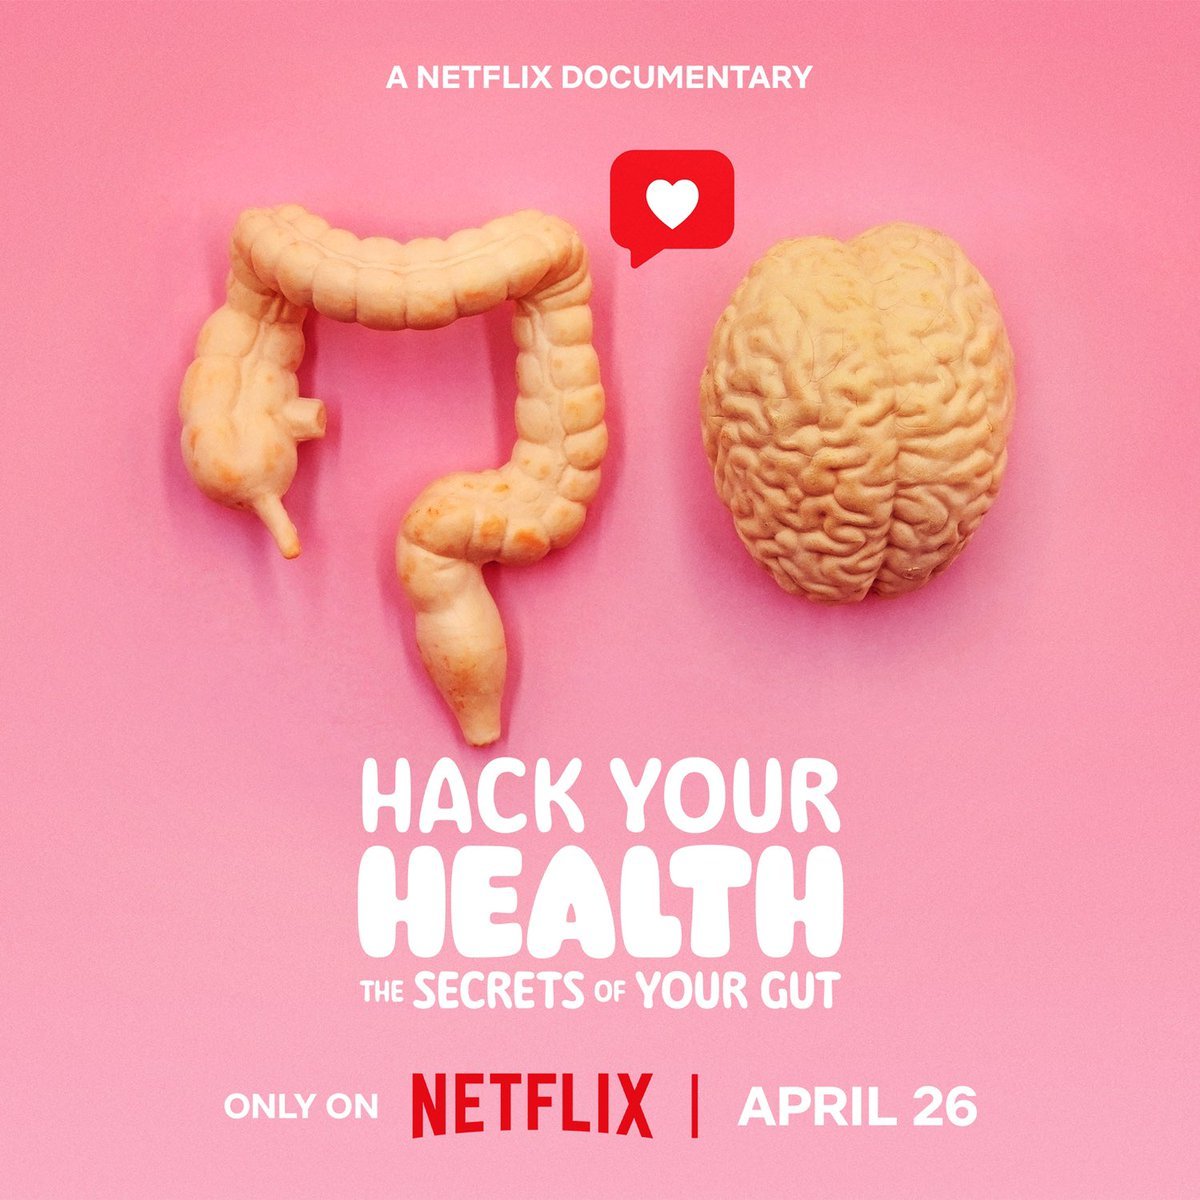 😍📢🔥 All my fav hashtags in a documentary : The Secrets of Your Gut #Fiber #ultra-processed food #Orthorexia #Gut-Brain Axis #Mucus #IBS #Industrializedmicrobiome #serotonin #FMTNews #precisionprobiotic 'FEED YOUR MICROBES' youtu.be/VwfuJr07P_g?si… #GITwitter #MedTwitter